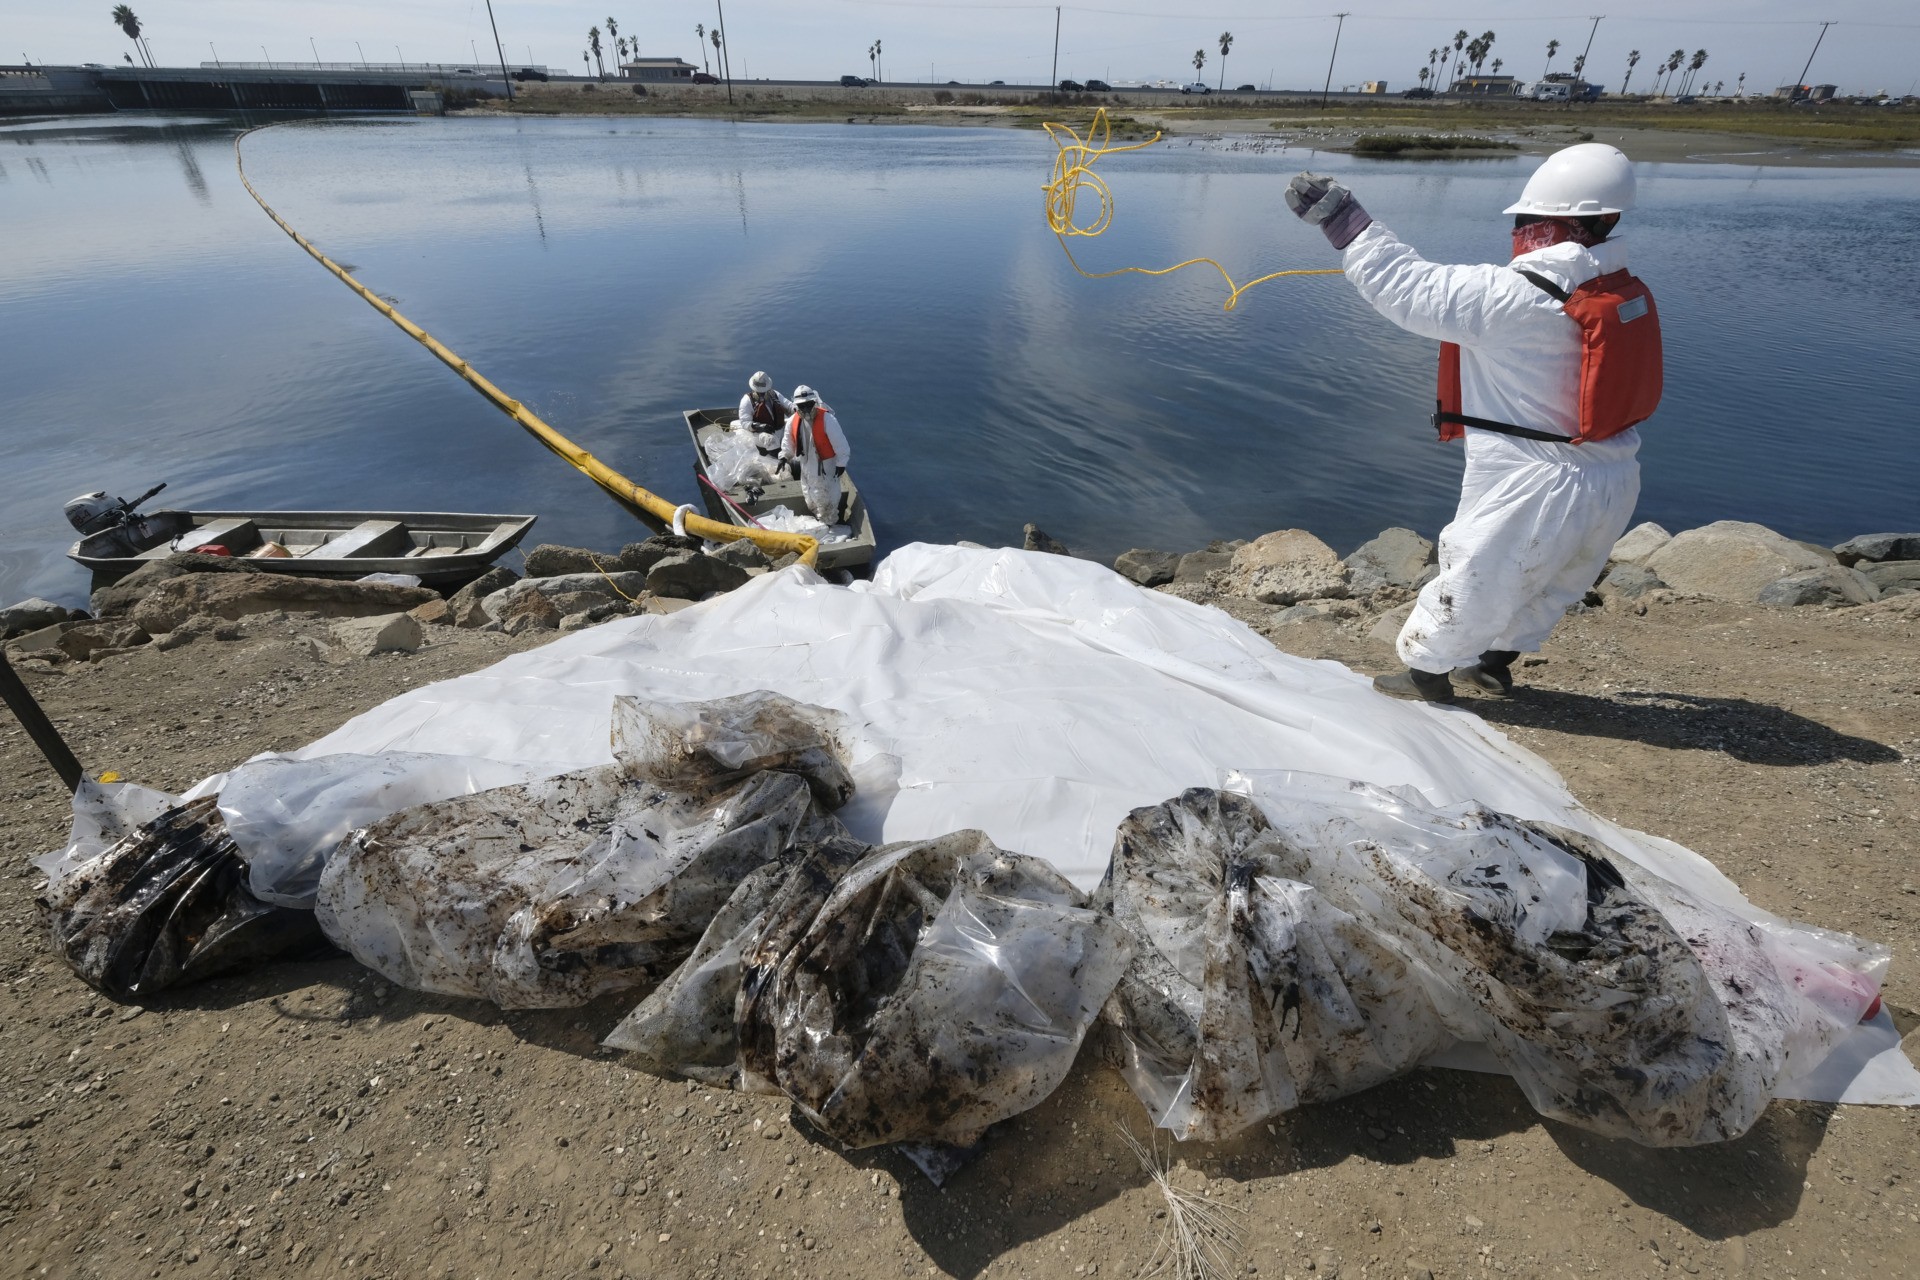 Cleanup contractors collect oil in plastic bags trying to stop further oil crude incursion into the Wetlands Talbert Marsh in Huntington Beach, Calif., Sunday, Oct. 3, 2021. One of the largest oil spills in recent Southern California history fouled popular beaches and killed wildlife while crews scrambled Sunday to contain the crude before it spread further into protected wetlands. (AP Photo/Ringo H.W. Chiu)